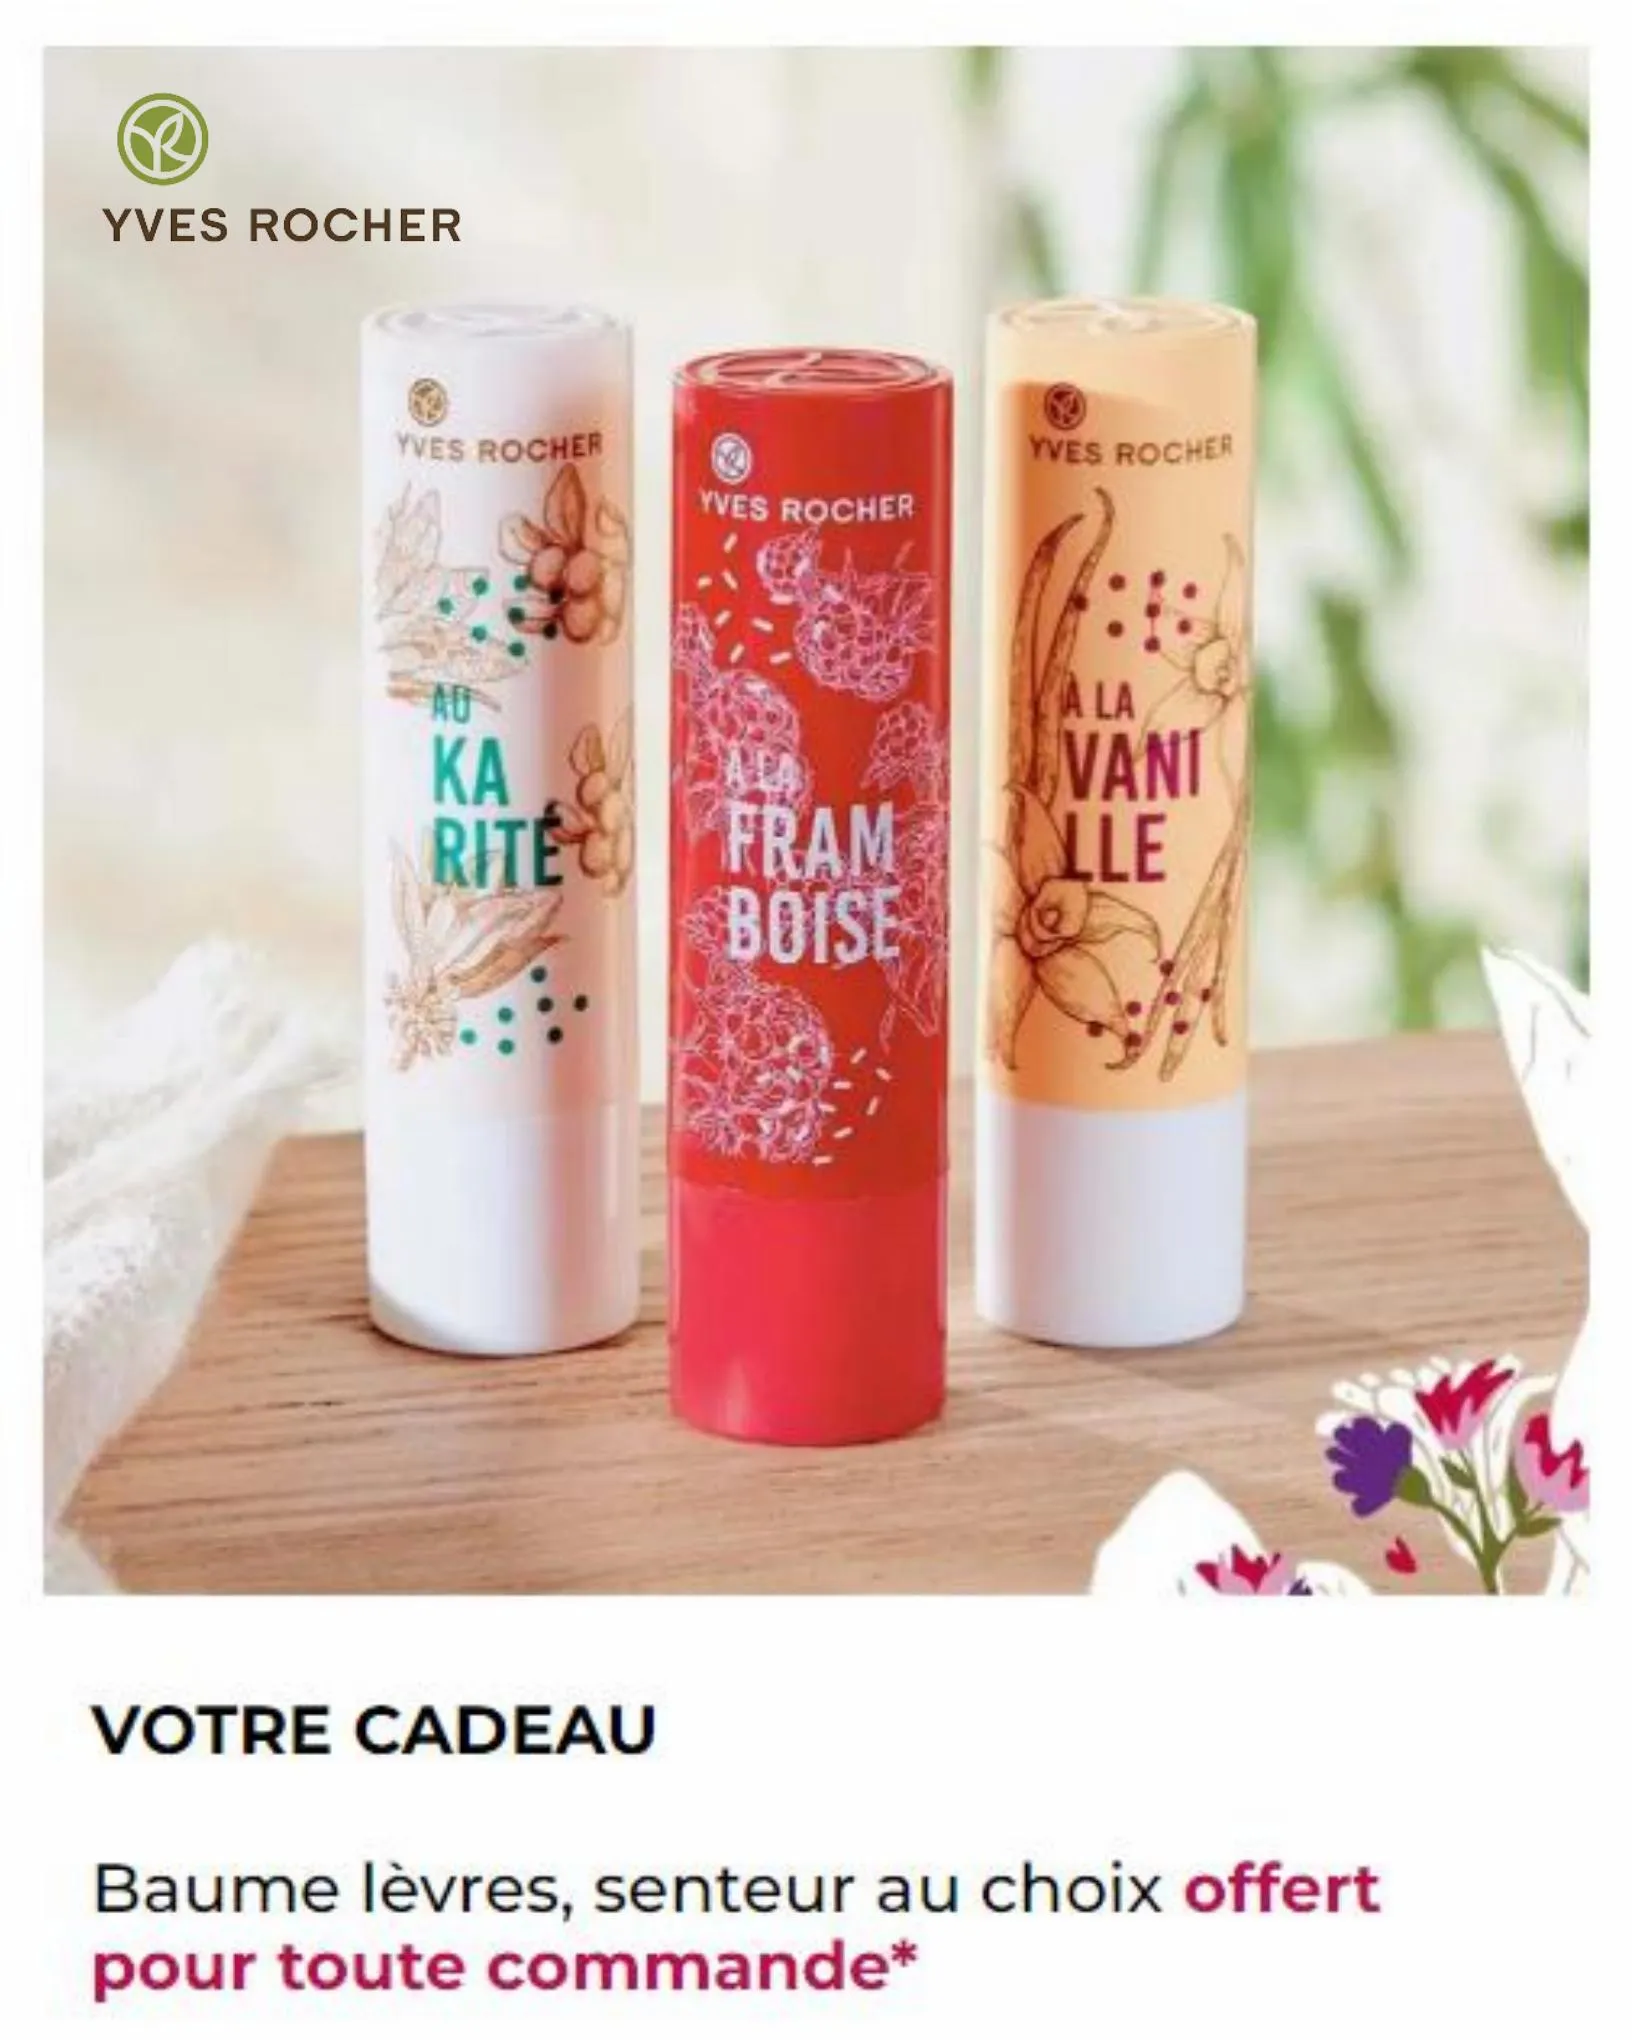 Catalogue Mes Promotions Yves Rocher, page 00001